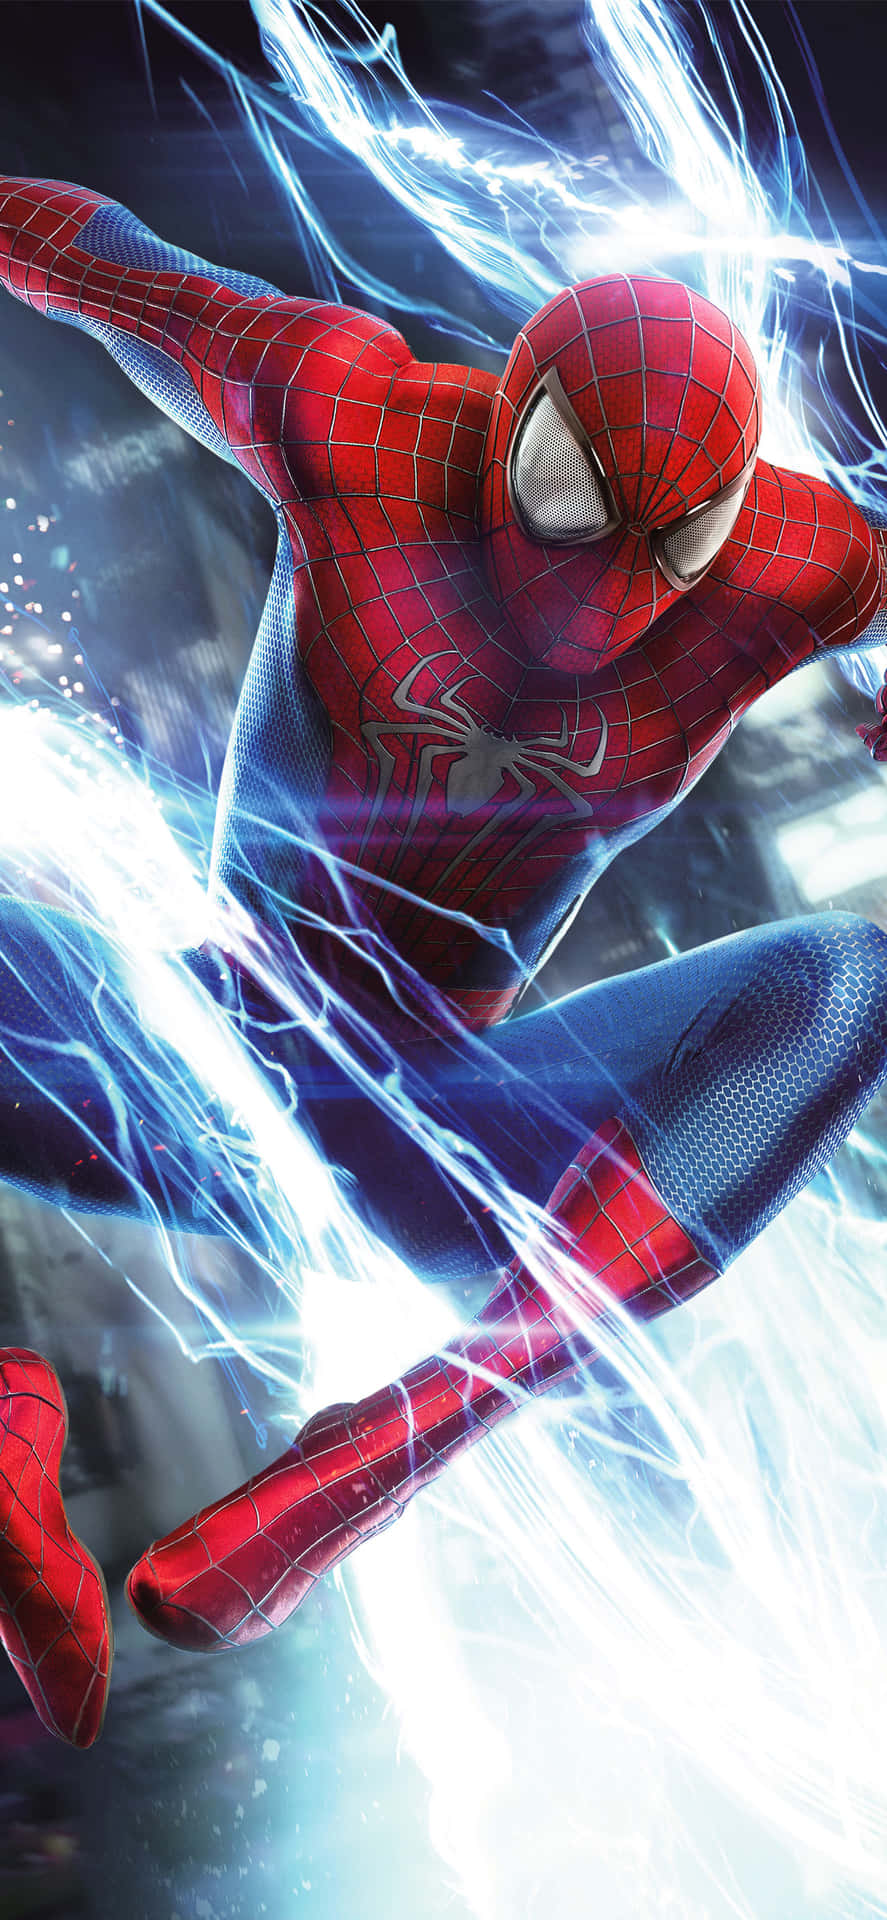 Unleash the power of the amazing Spider Man on your Iphone! Wallpaper